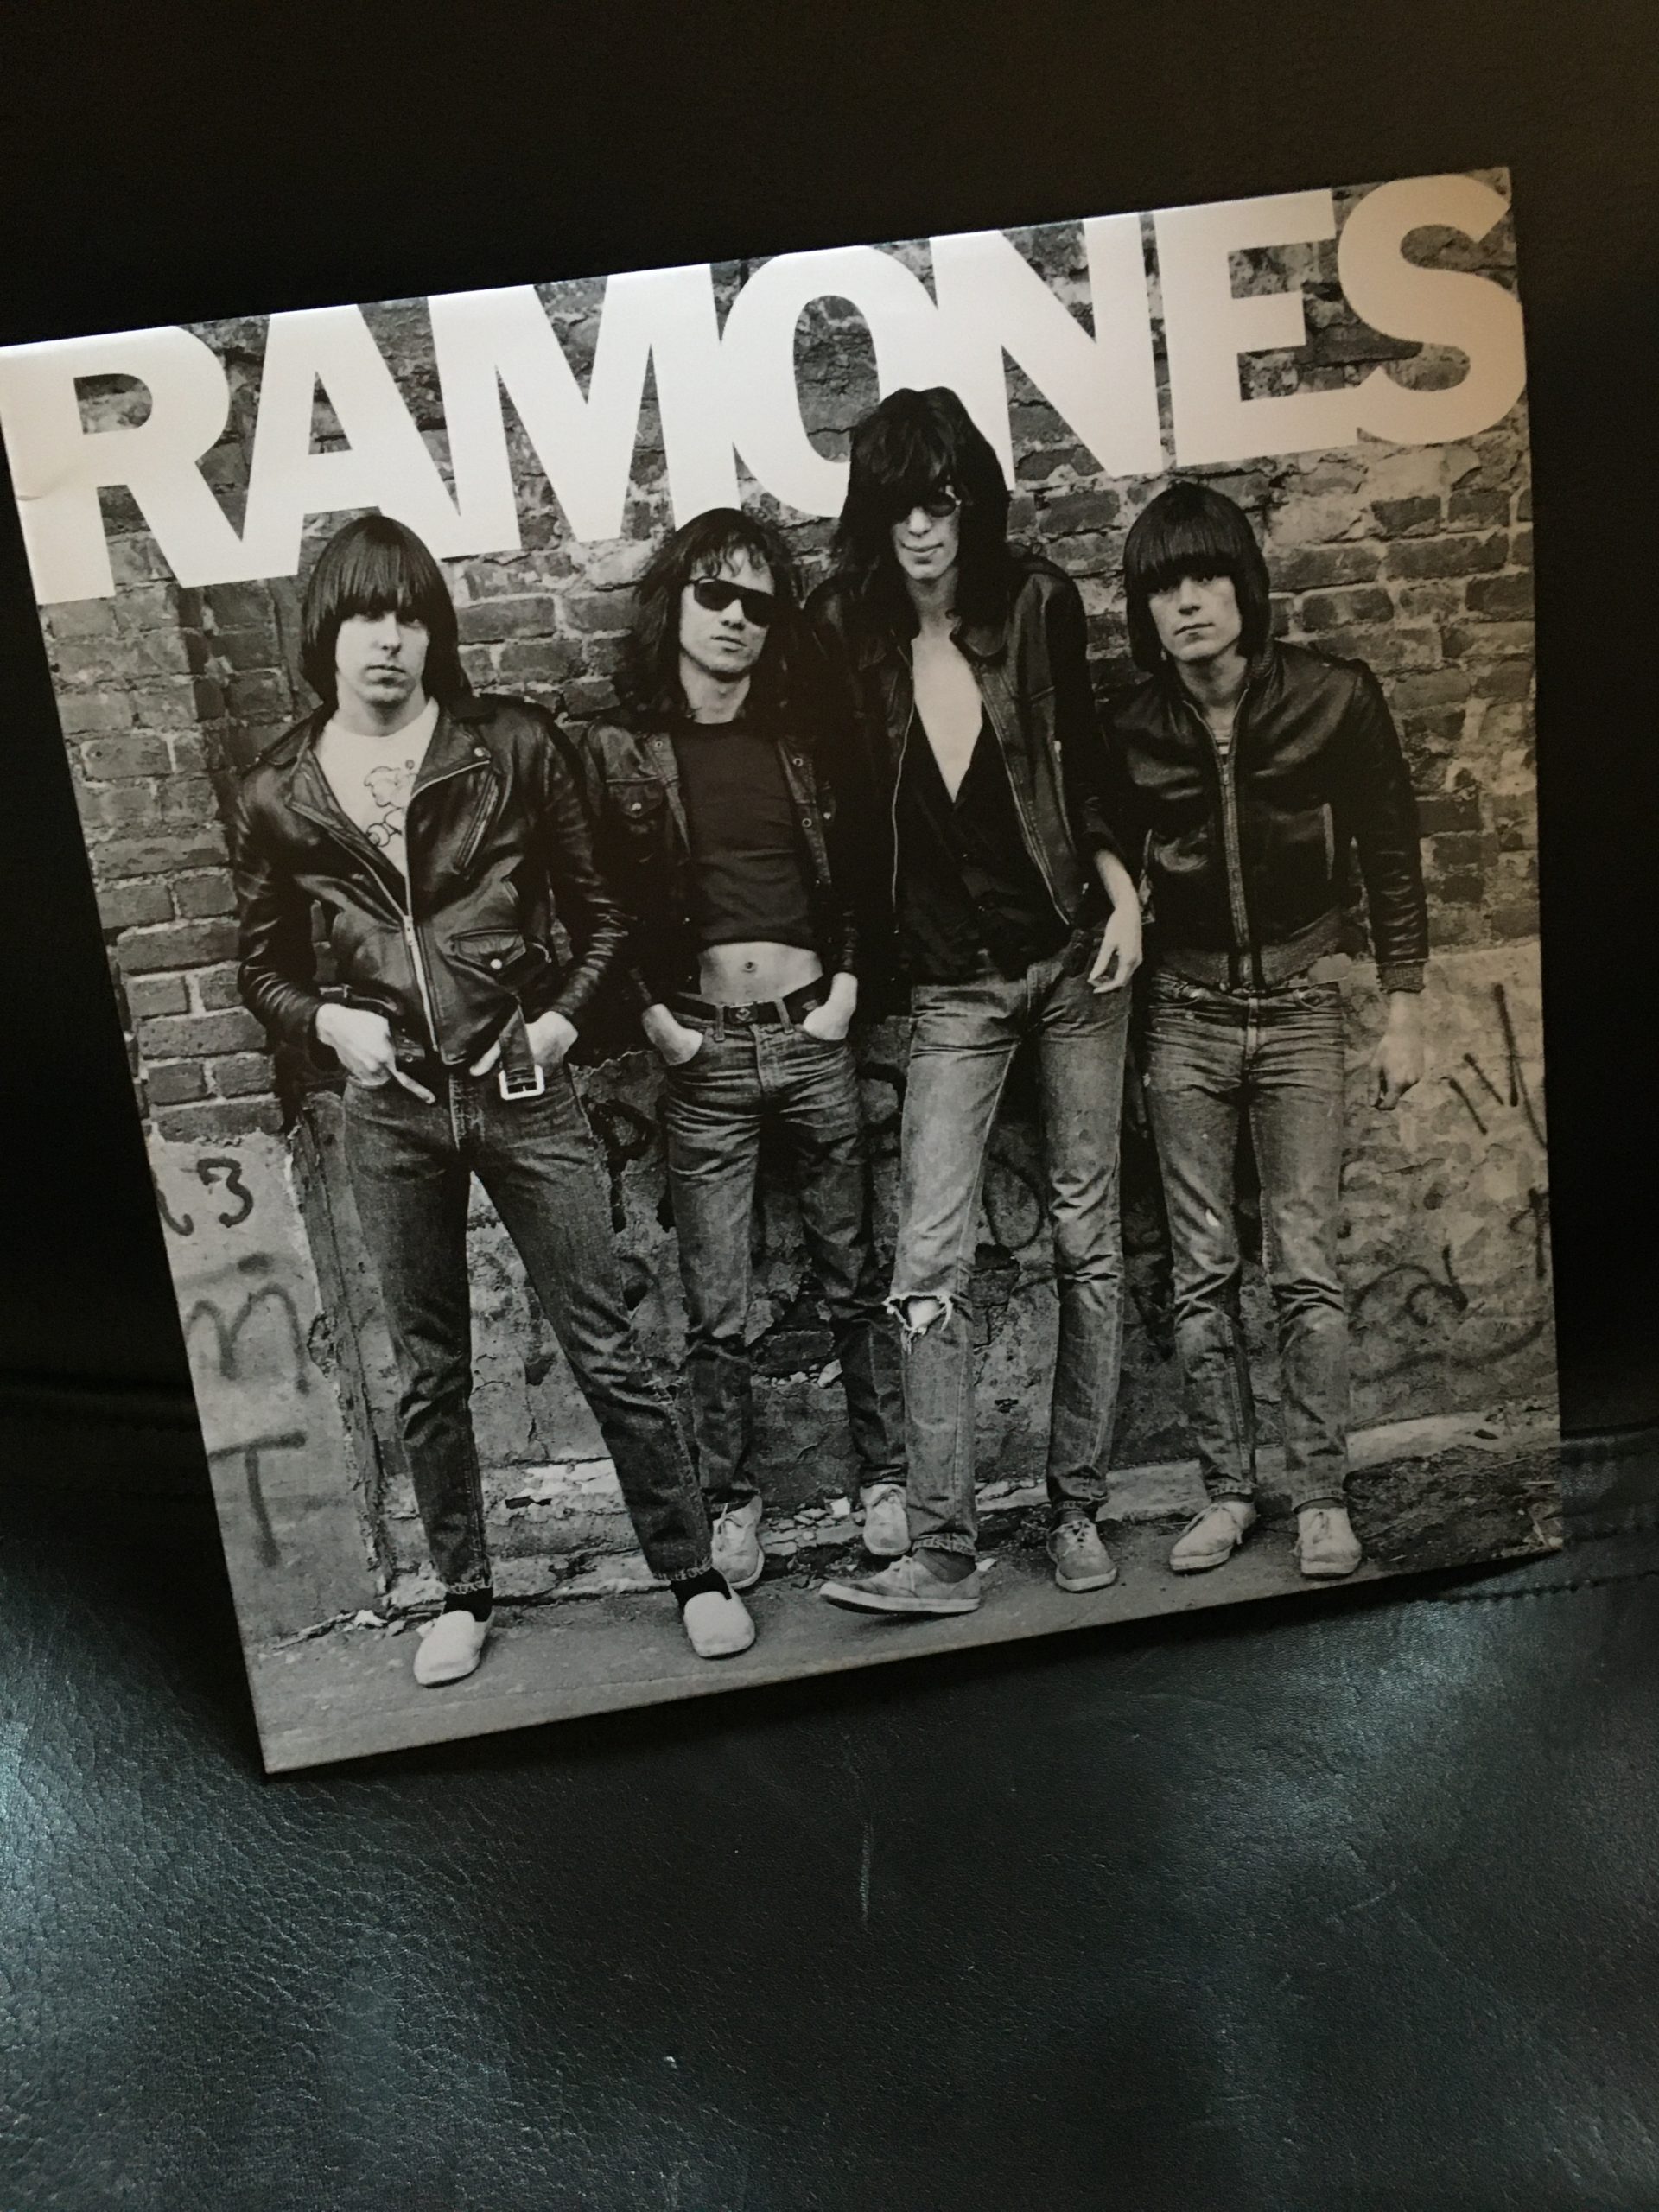 The Ramones Vinyl - Search and Destroy